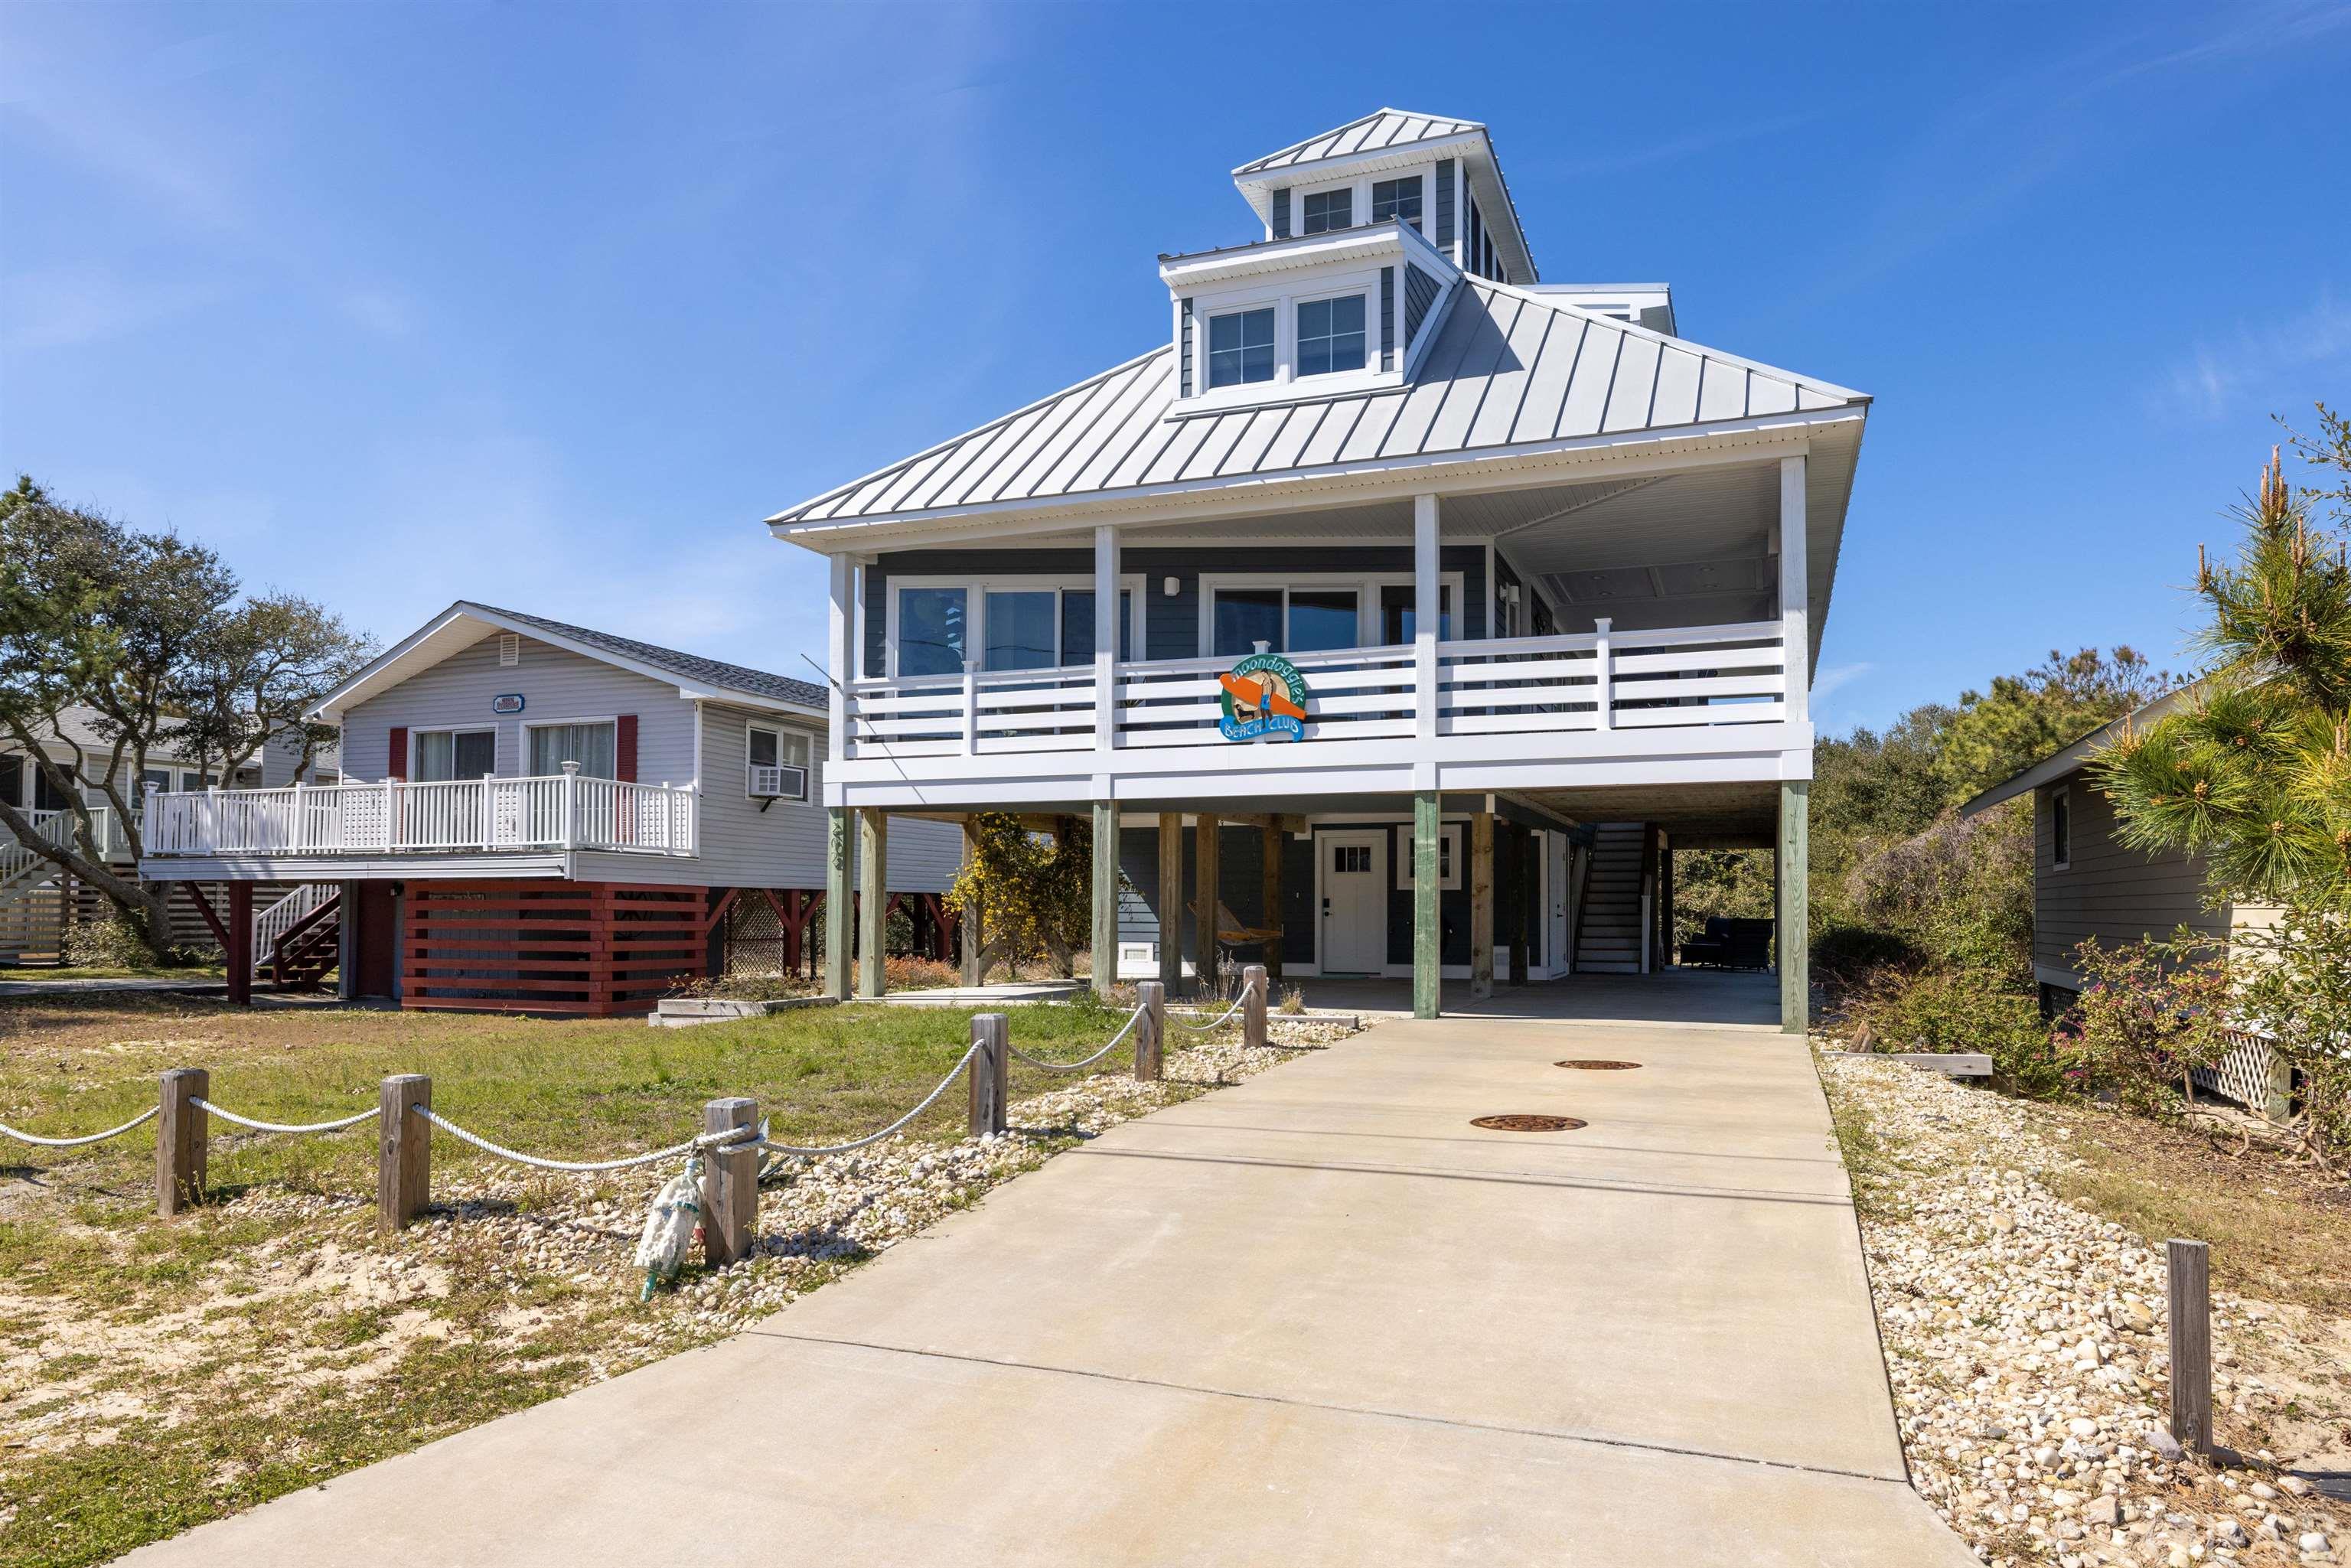 SELLERS CALLING FOR HIGHEST & BEST BY 5PM 4/2. With around 56K gross rental income for 2021, visitors and buyers alike can agree that Moondoggies Beach Club is the perfect beach retreat!   Moondoggies was built in 2016 and is like-new!  The interior and exterior were thoughtfully designed and decorated and include plenty of upgrades such as the metal roof, indoor/outdoor gas fireplace, and shiplap. Walk in from the ground level to be greeted with fun, coastal tile and bright wooden stairs.  The second level has an open floor plan with a beautiful well-equipped kitchen featuring quartz countertops, open shelving with a tiled backsplash to the ceiling, free standing range hood, built-in microwave, and a custom wooden surfboard bar.  The living room is cozy and inviting with the indoor/outdoor gas fireplace. The second level also features a full bathroom with a double sink vanity and tiled shower, and two bedrooms, both tastefully decorated.  The third level has a master bedroom with a king bed and a single day bed and an ensuite bathroom with a double sink vanity and white subway tile shower.  The additional room is used as the 4th bedroom and includes two twin beds and a small sitting area.  Last but not least, the 4th level features a crows nest inspired area with comfortable cushioned bench seating and ocean views!  In addition to the exquisite interior, the outdoor space is just as inviting!  The wrap around covered porch includes low maintenance vinyl railings and cozy seating to enjoy the fresh salt air.  The ground level has an additional seating area, hammock, and outdoor shower.  The property is centrally located in Kill Devil Hills and is close to the beach (0.3mi), sound, Bay Dr multiple-use path, local restaurants, and entertainment.  The Avalon Association includes a beach parking pass by the Avalon pier for only $30/yr. This property is bursting with character and could be used as a primary, secondary, or investment property.  Check out what the guests have to say about this coastal retreat! https://www.airbnb.com/rooms/20064032?source_impression_id=p3_1564494225_c8V5%2BEzi1zPL69FF&fbclid=IwAR2AnJeumChRijR046xFSgCs6T1sHUuvreM7pj10V7arEOSxh99Cy2Bxz9o